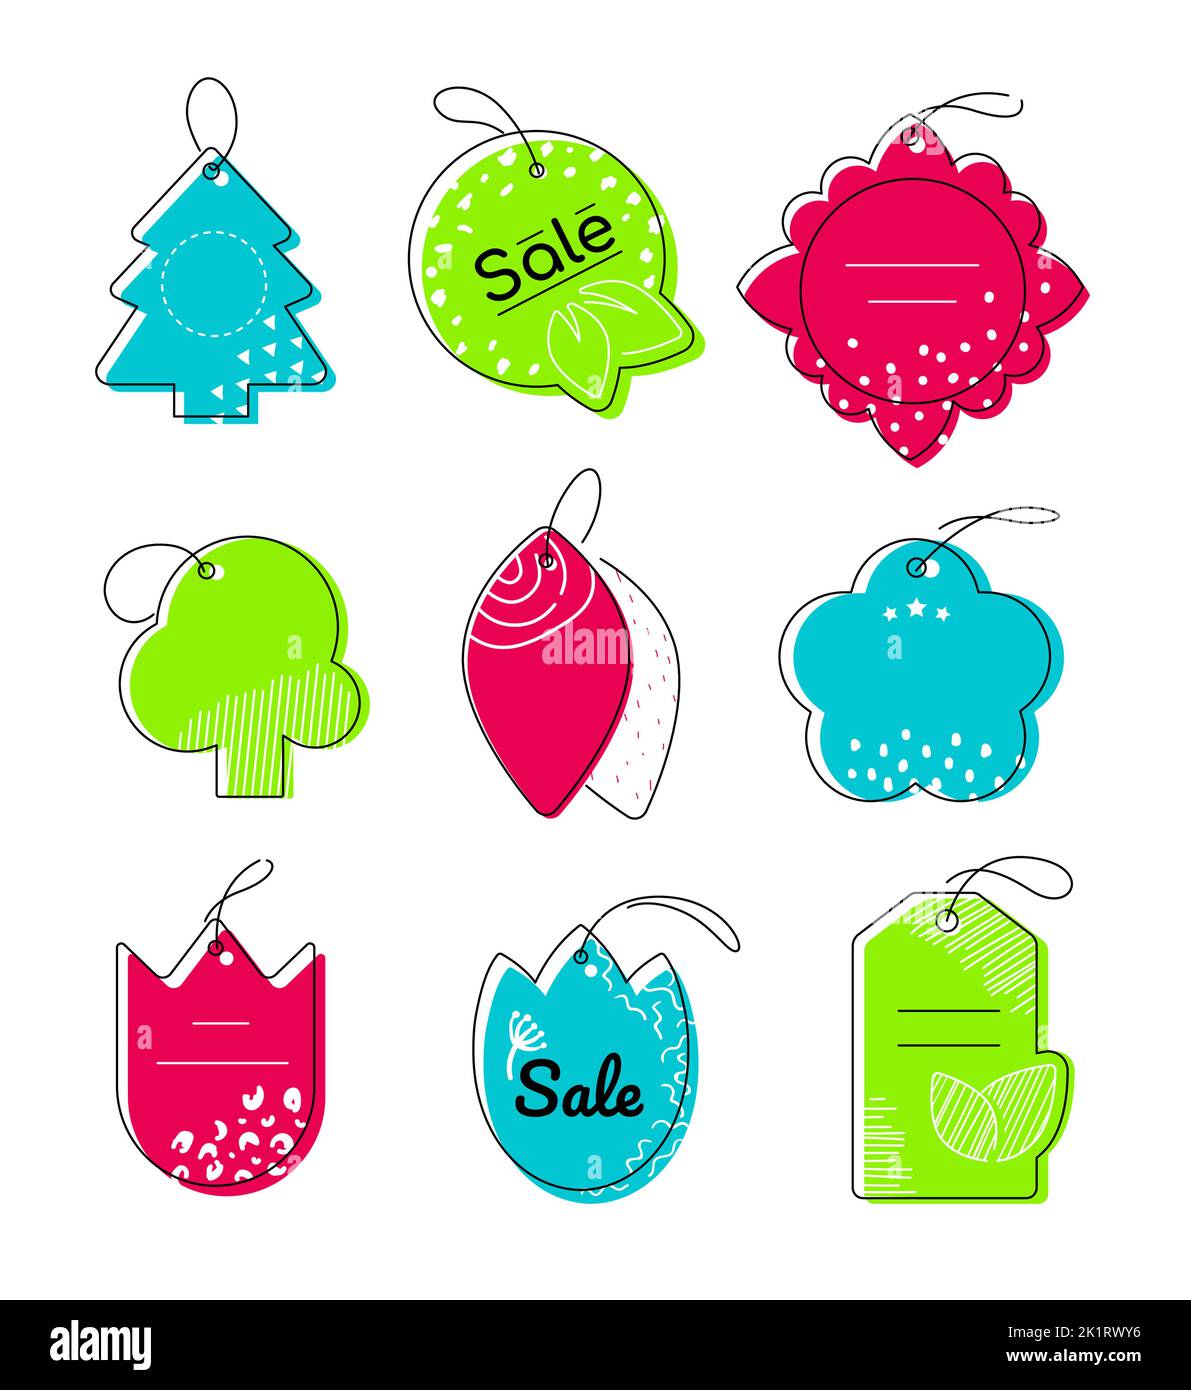 Price tag and sale - line design style illustration set Stock Vector